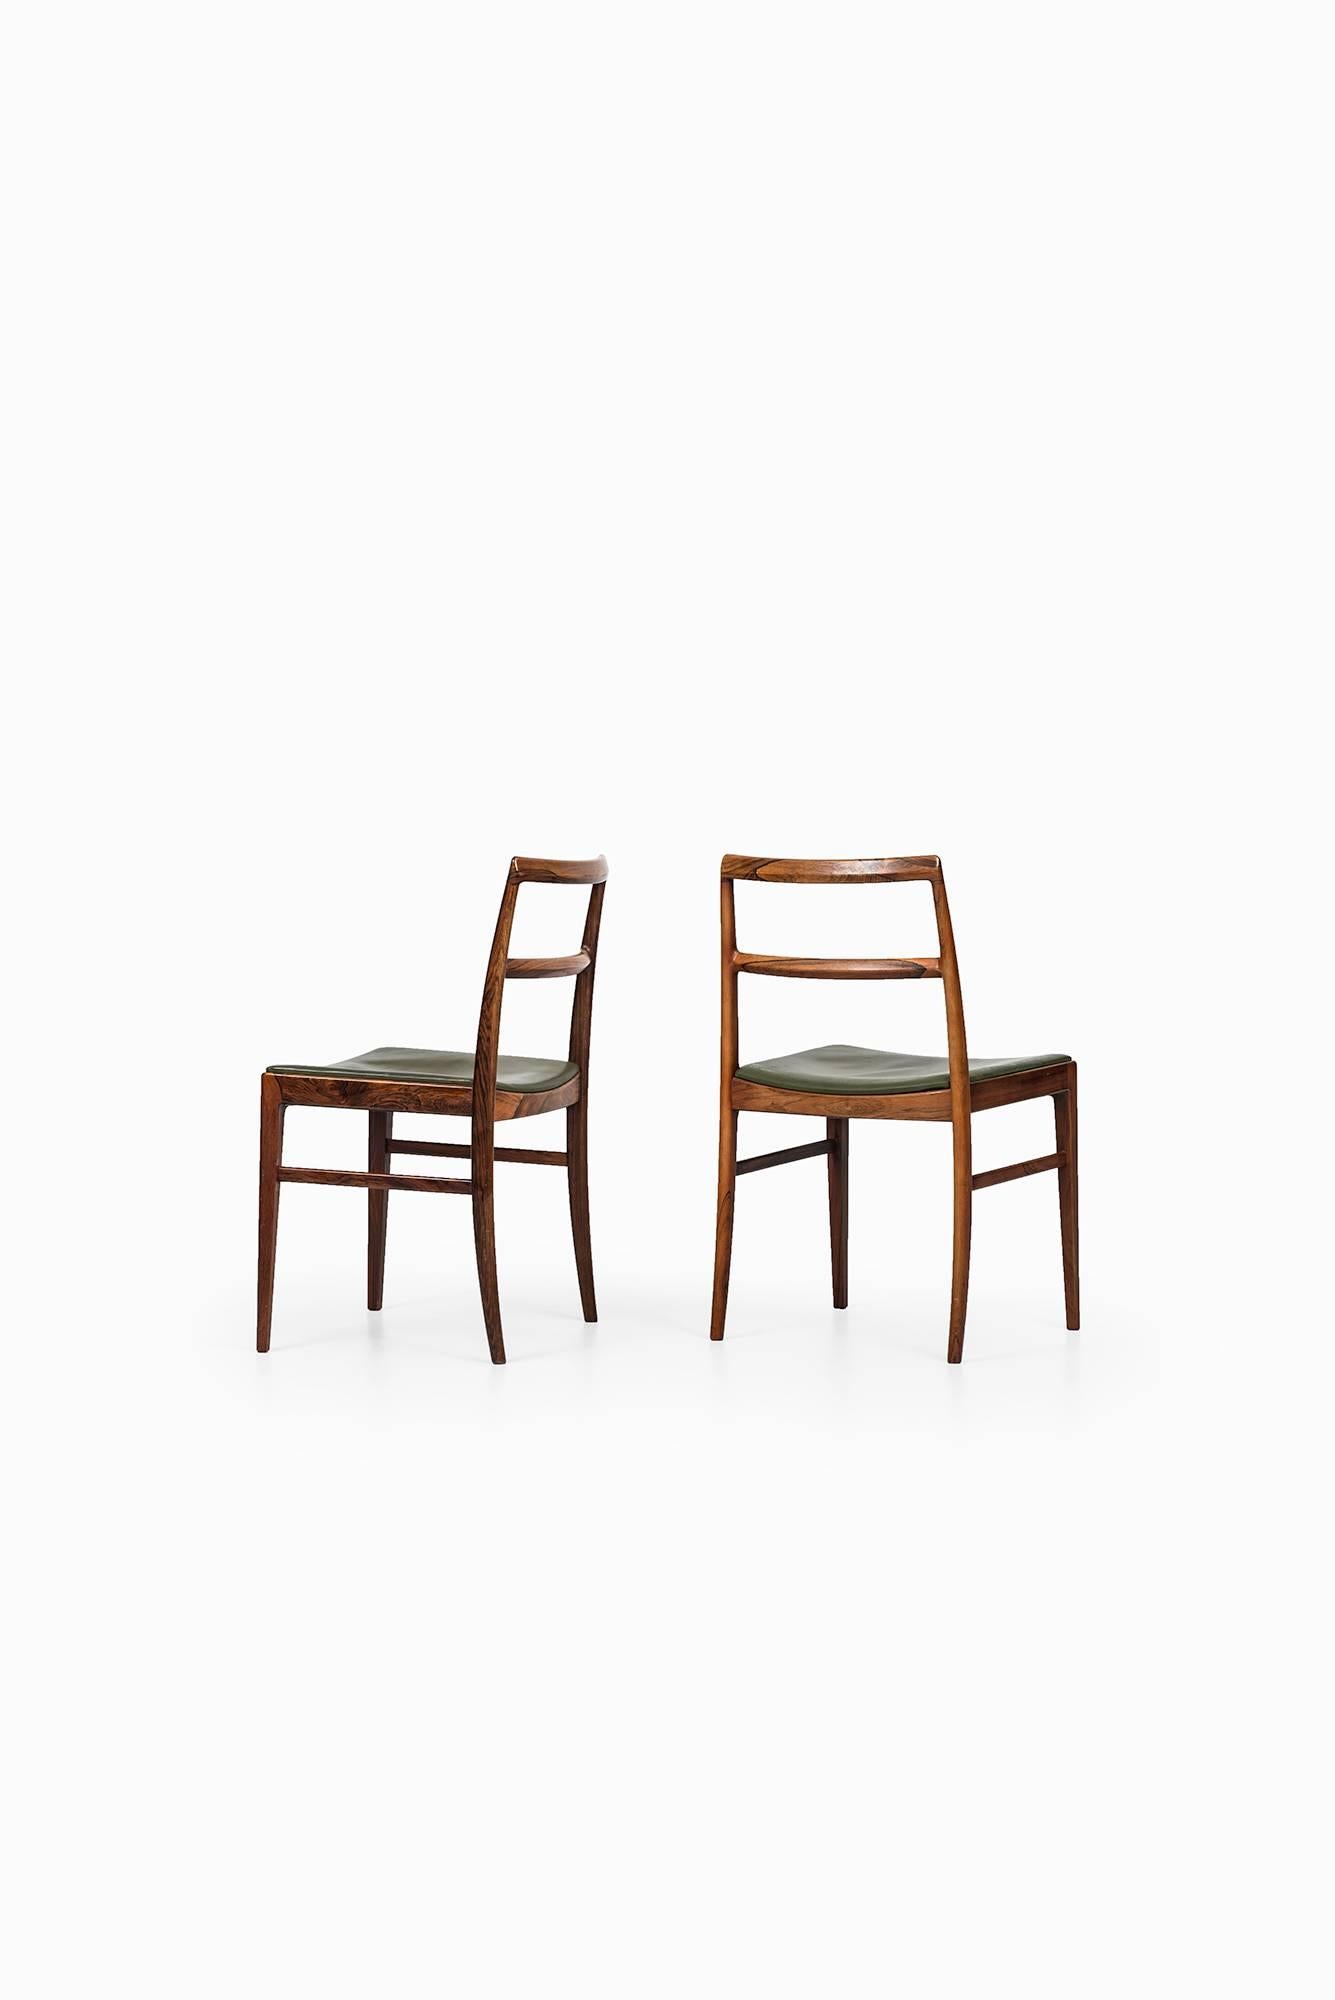 Rare set of eight dining chairs model 430 designed by Arne Vodder. Produced by Sibast møbelfabrik in Denmark.